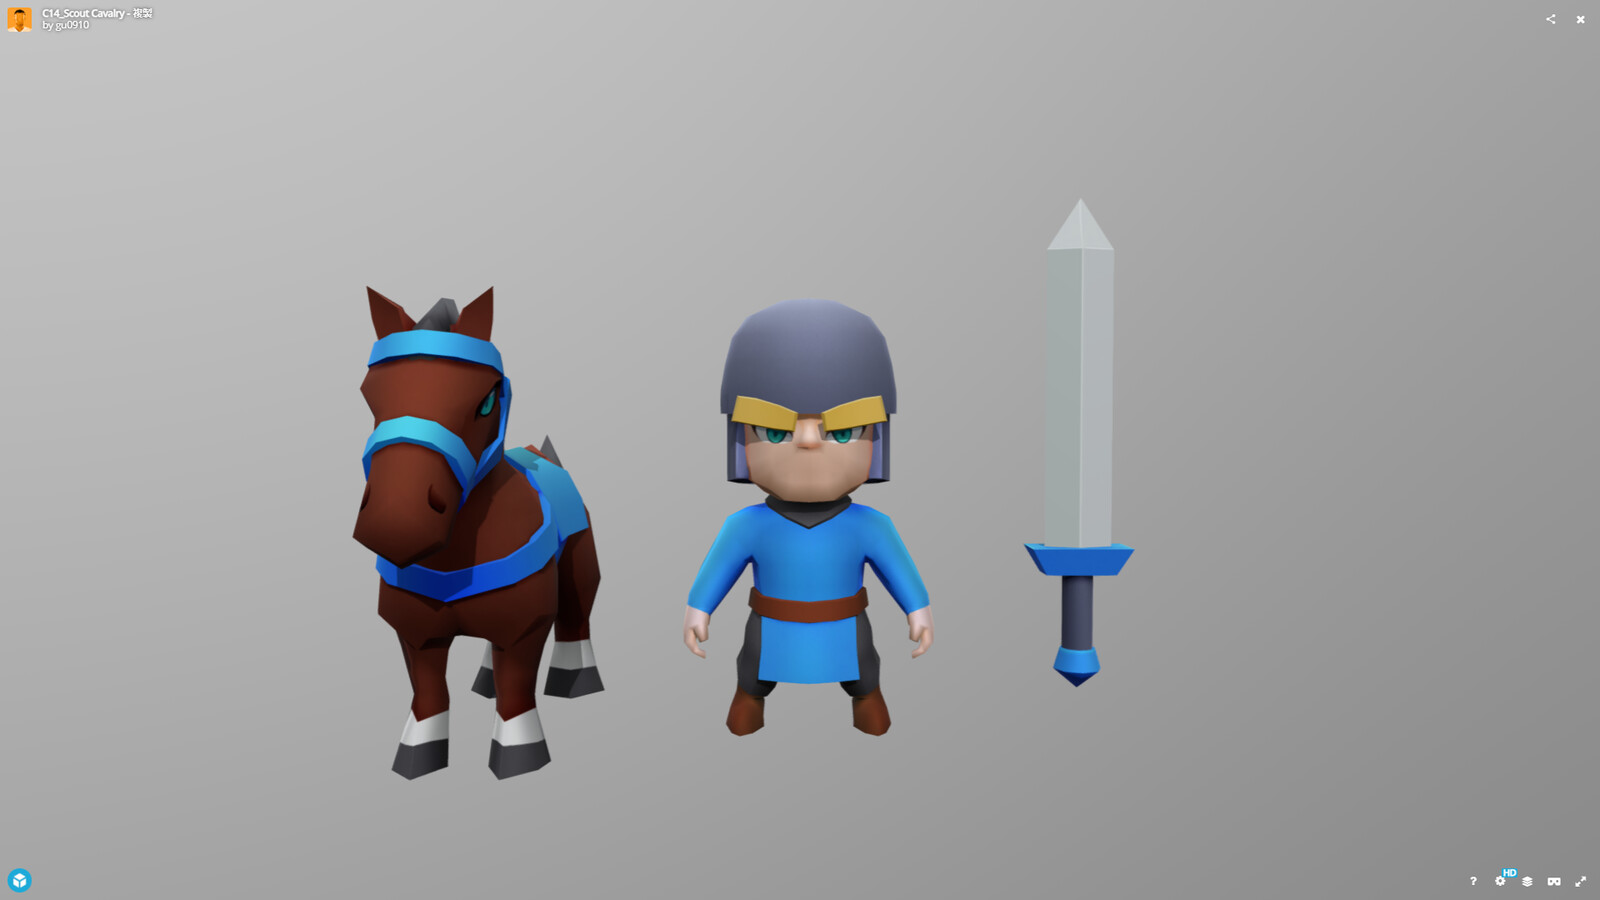 301_Scout Cavalry